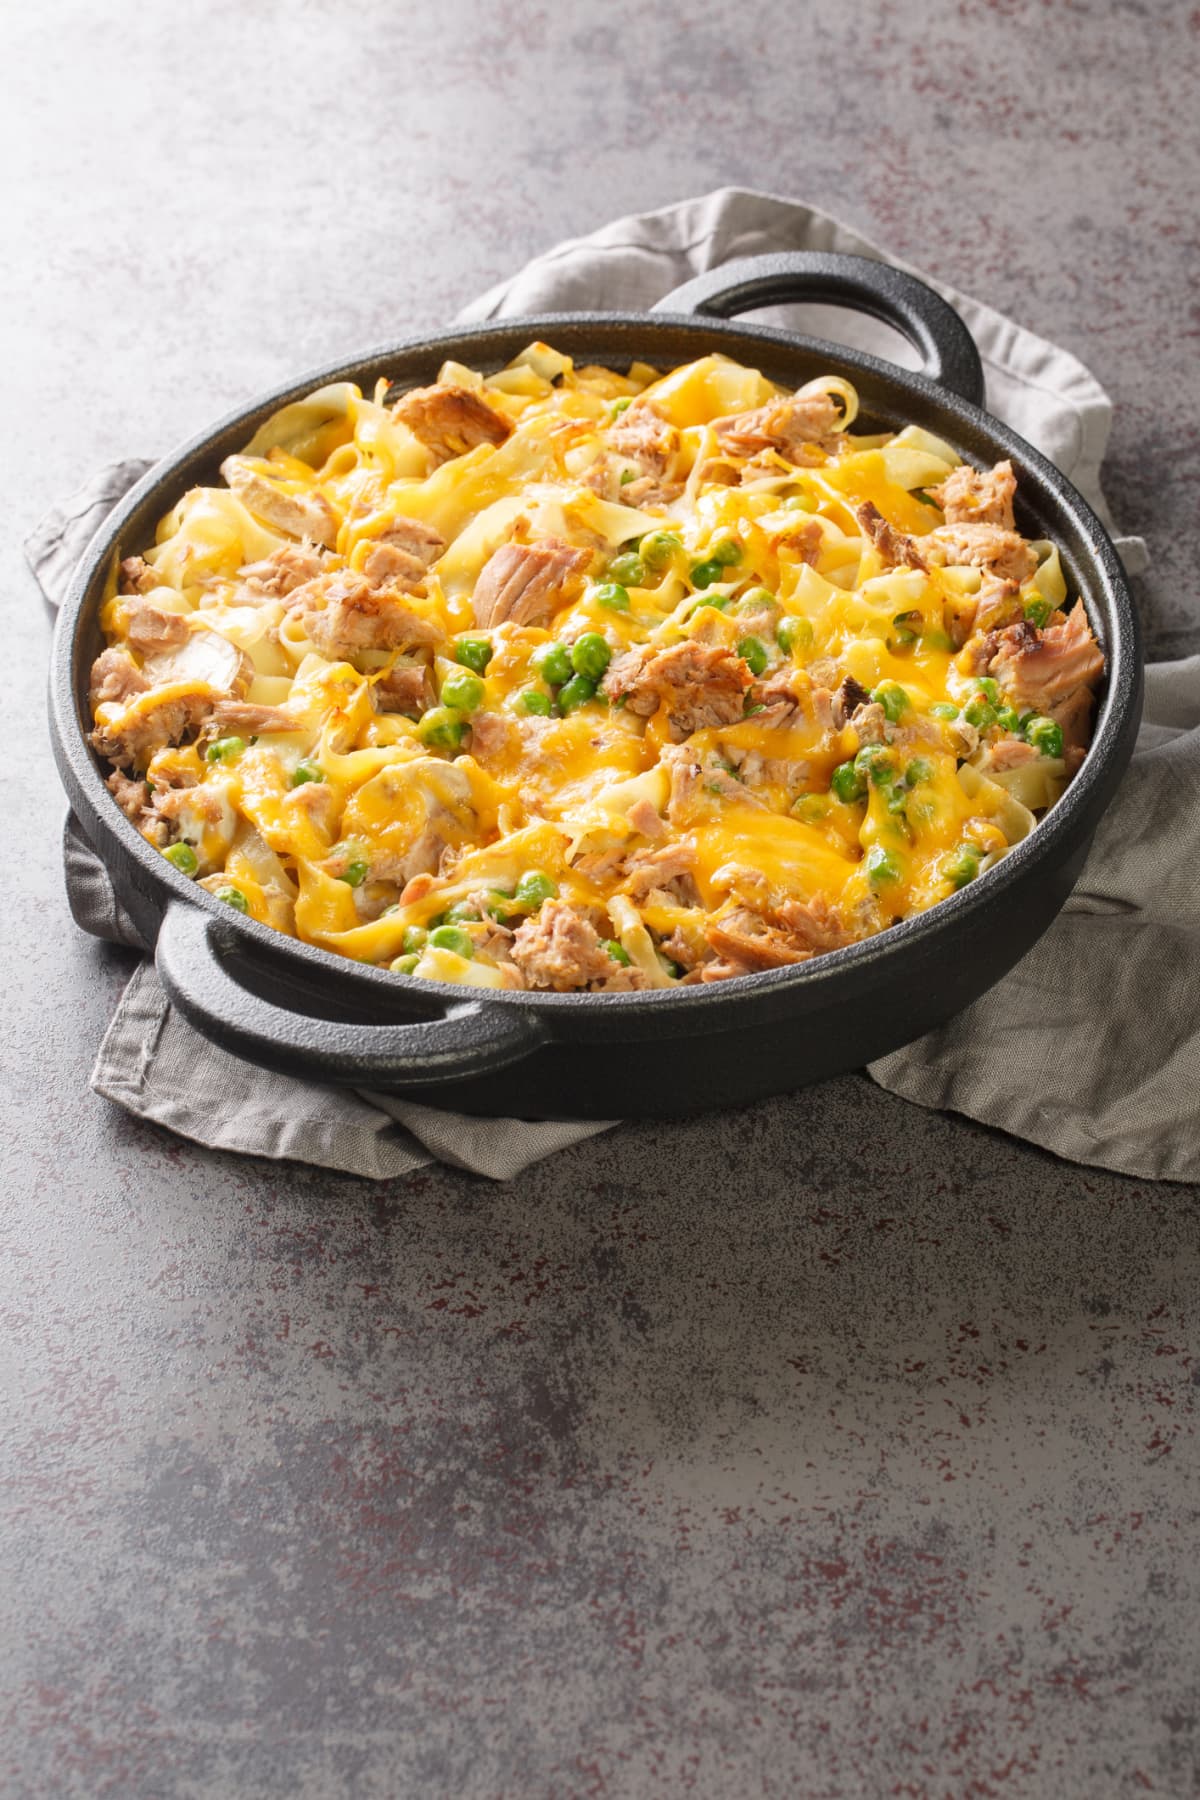 Canned Tuna casserole with pasta, green peas, mushrooms and cheddar cheese close-up in a baking dish on the table. Vertical